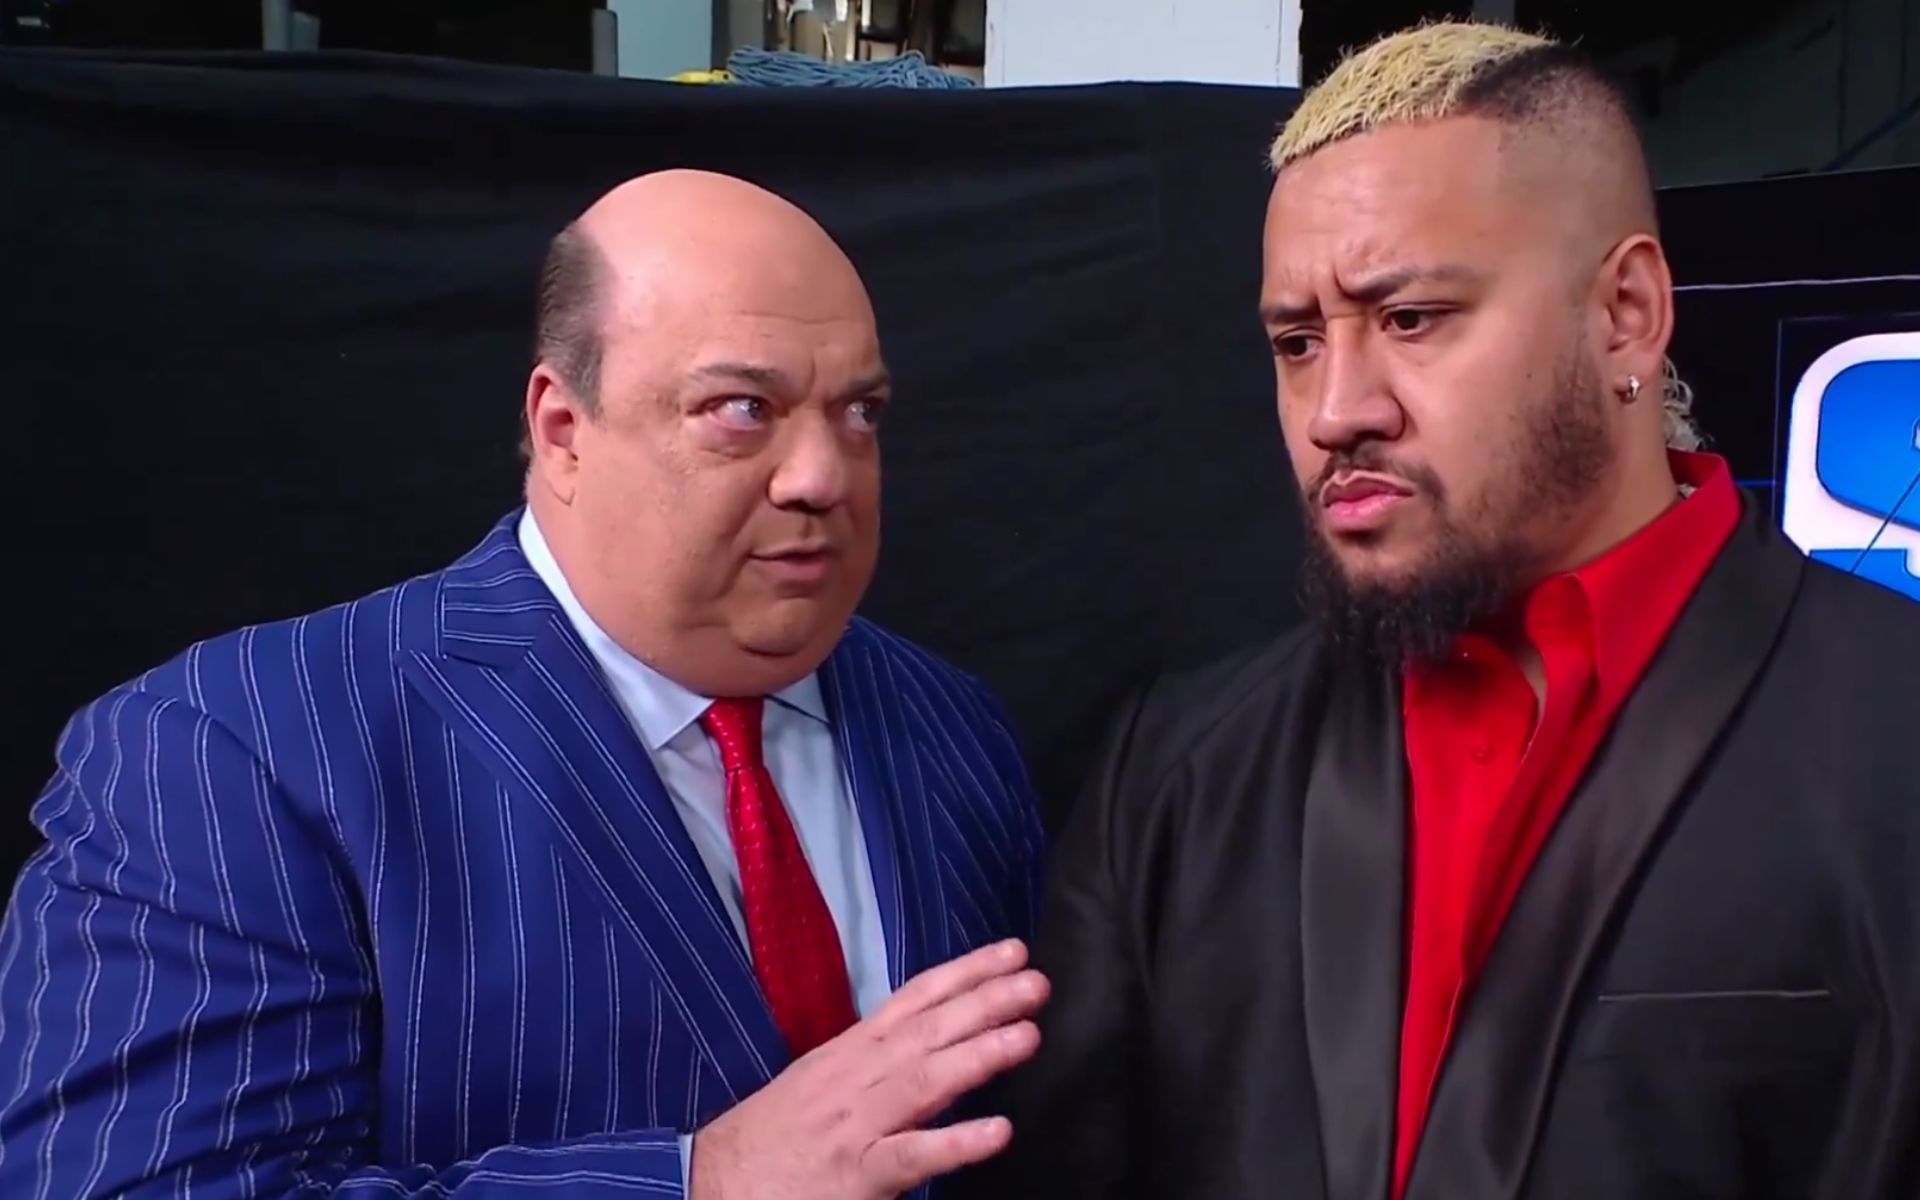 Paul Heyman was looking to offer his guidance